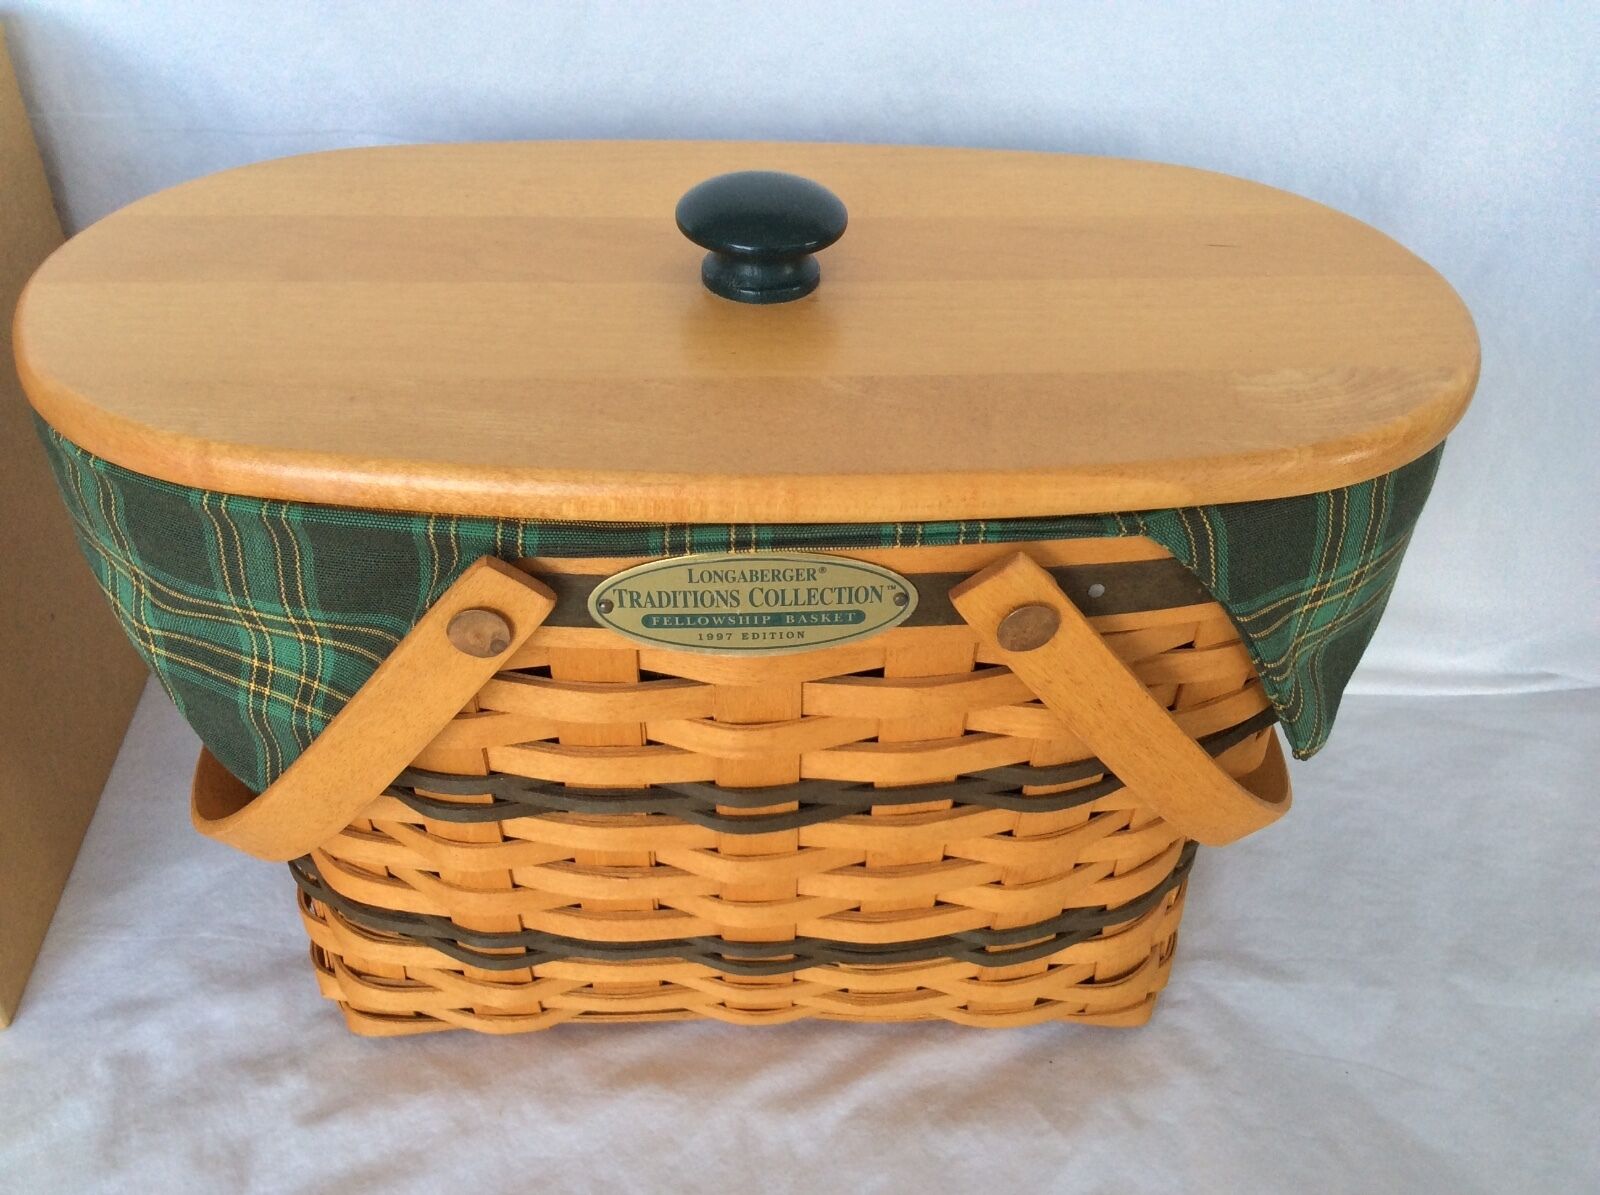 FELLOWSHIP Traditions Basket Liner Protector Lid New in Box Longaberger 